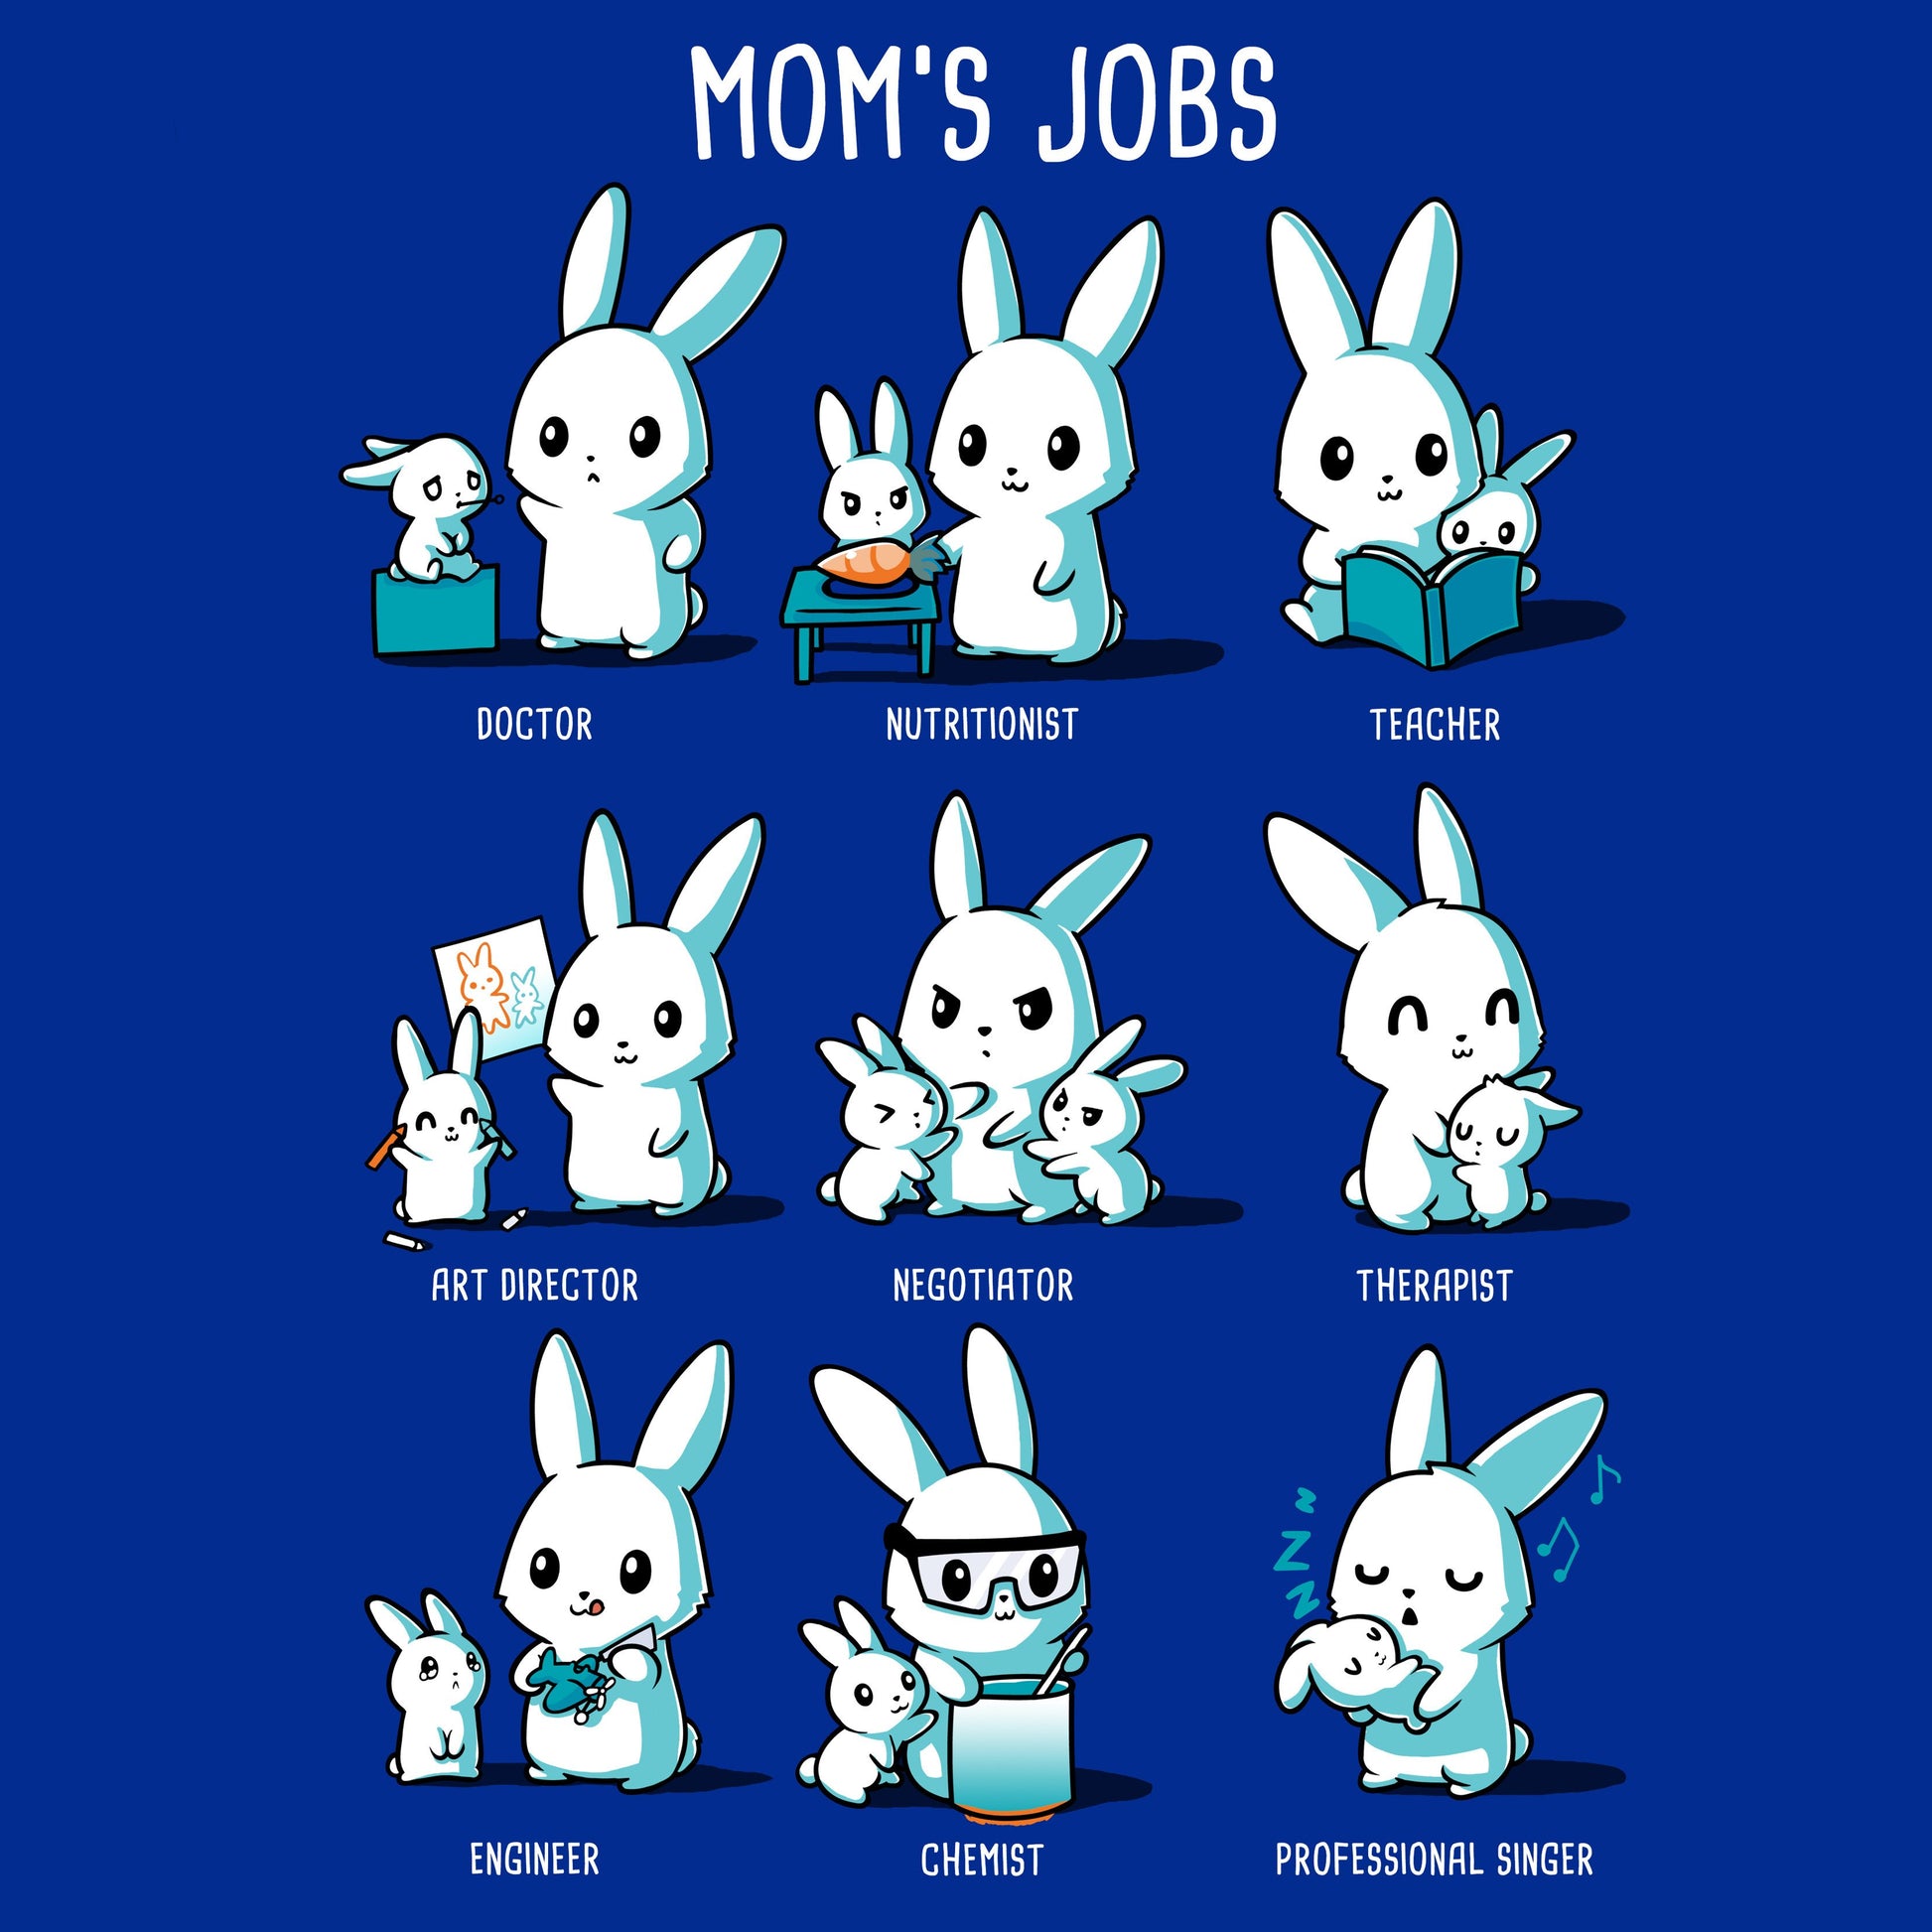 A TeeTurtle t-shirt displaying "Mom's Jobs" with a touch of nutritionist.